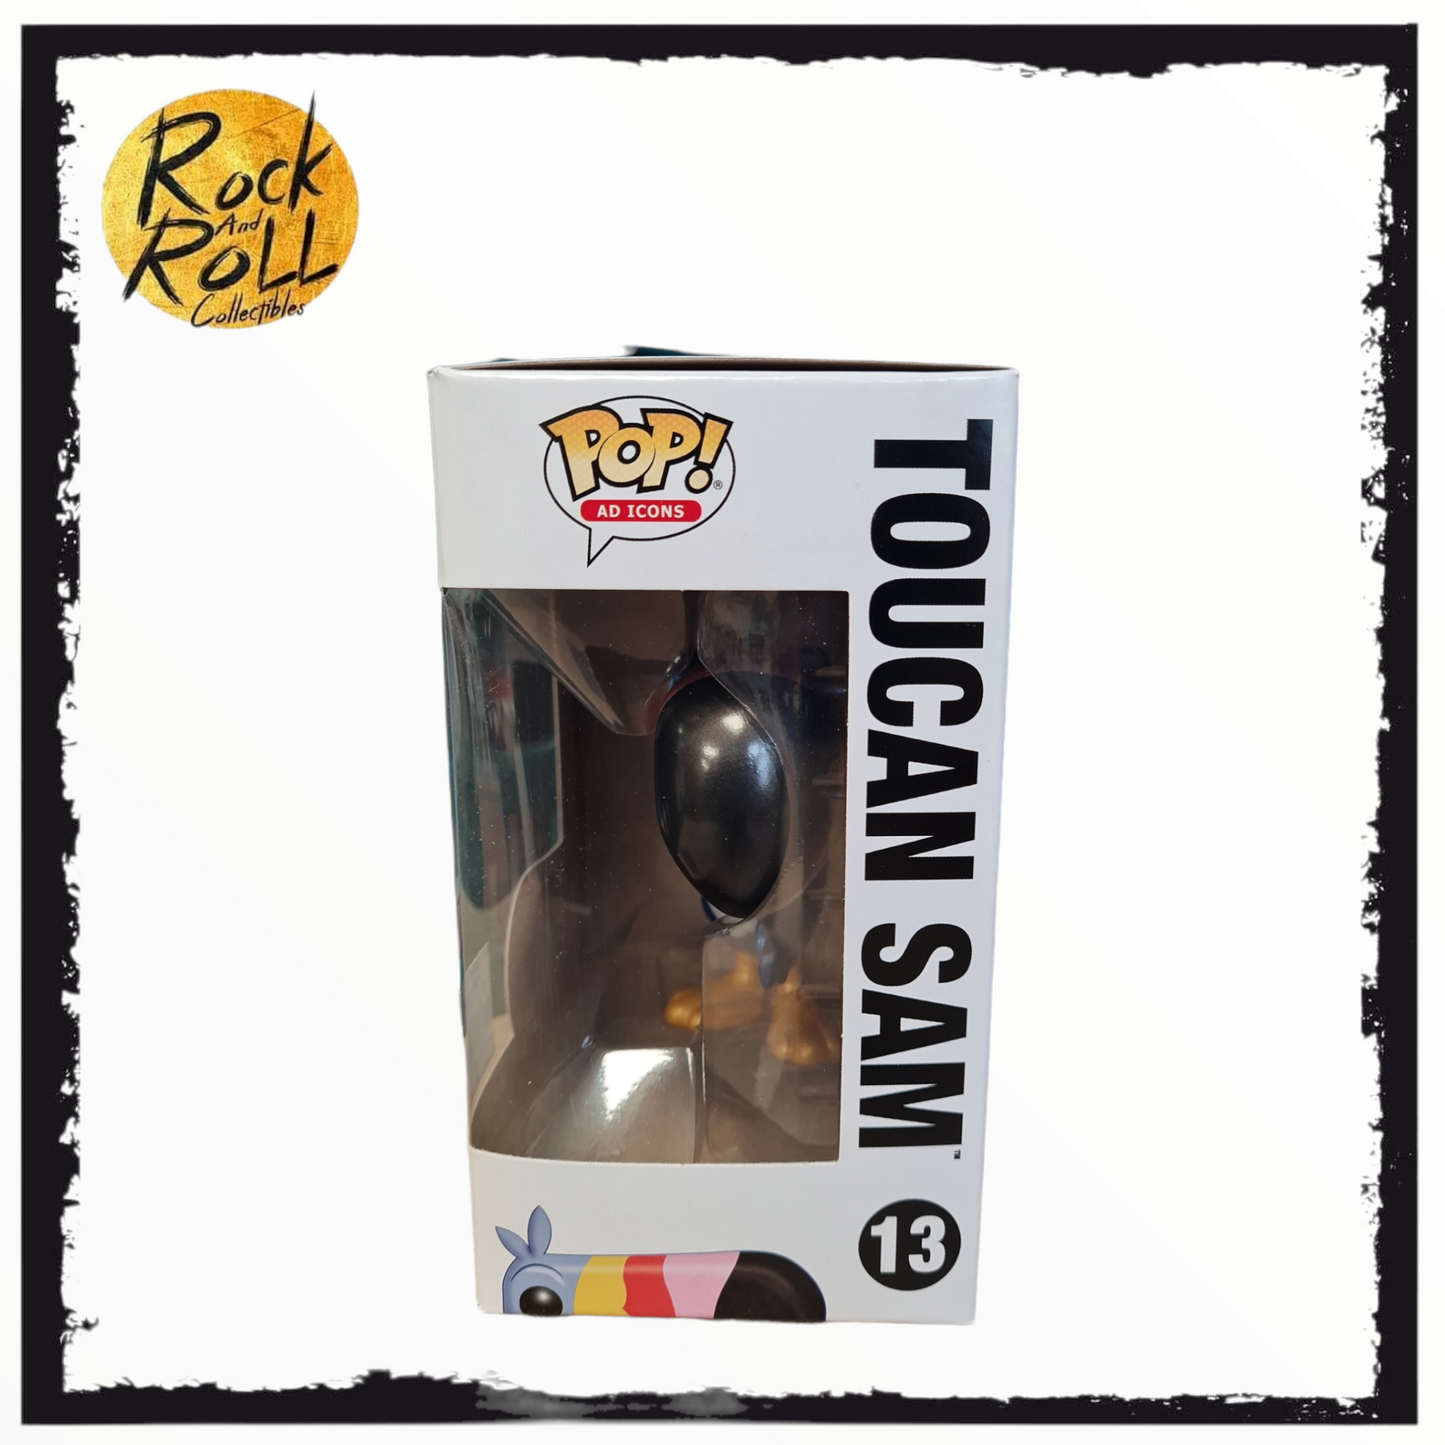 Funko Pop! Ad Icons Froot Loops - Metallic Toucan Sam #13 LE 1000